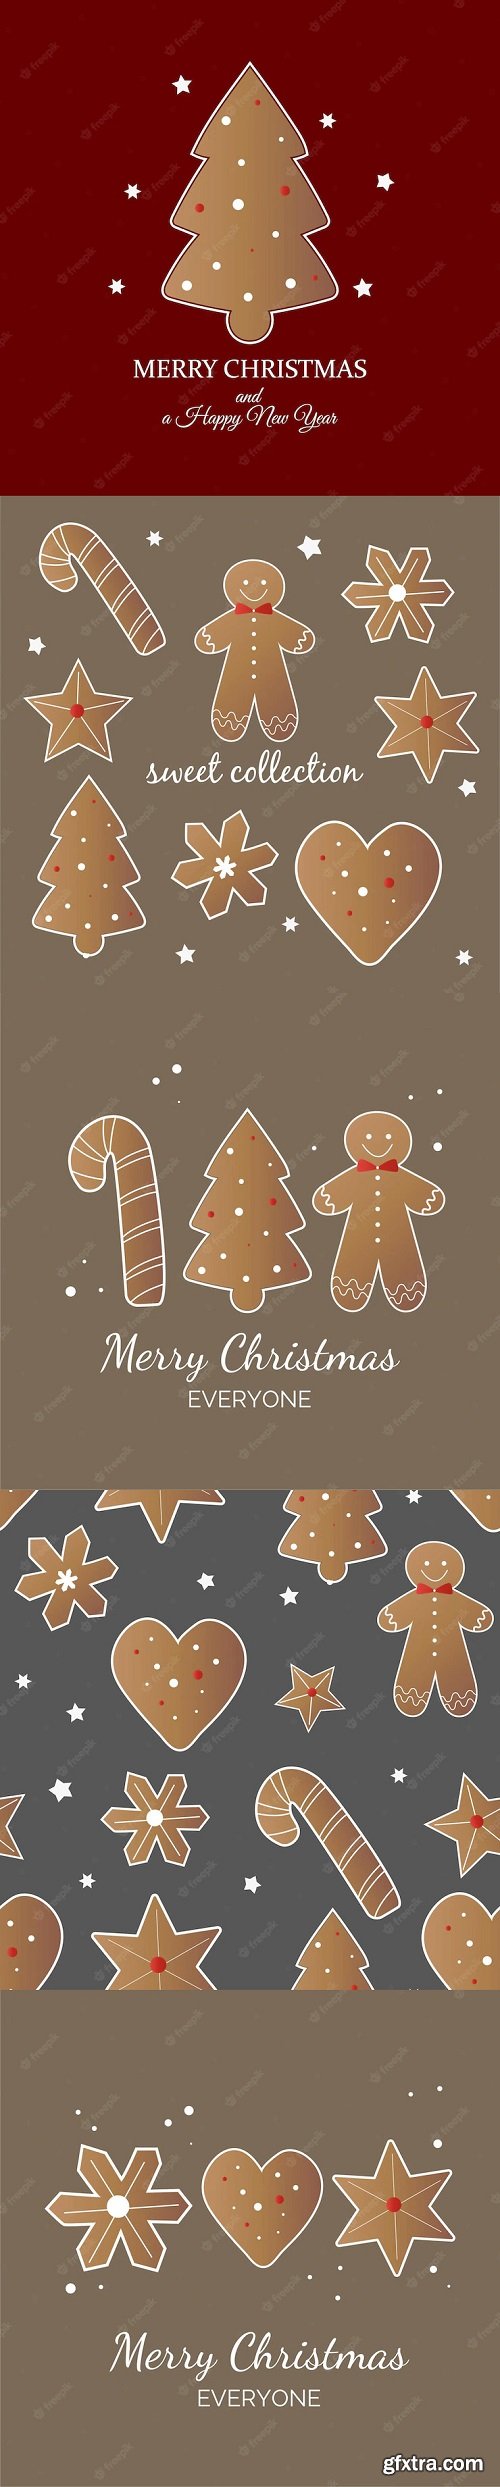 Christmas card with gingerbread